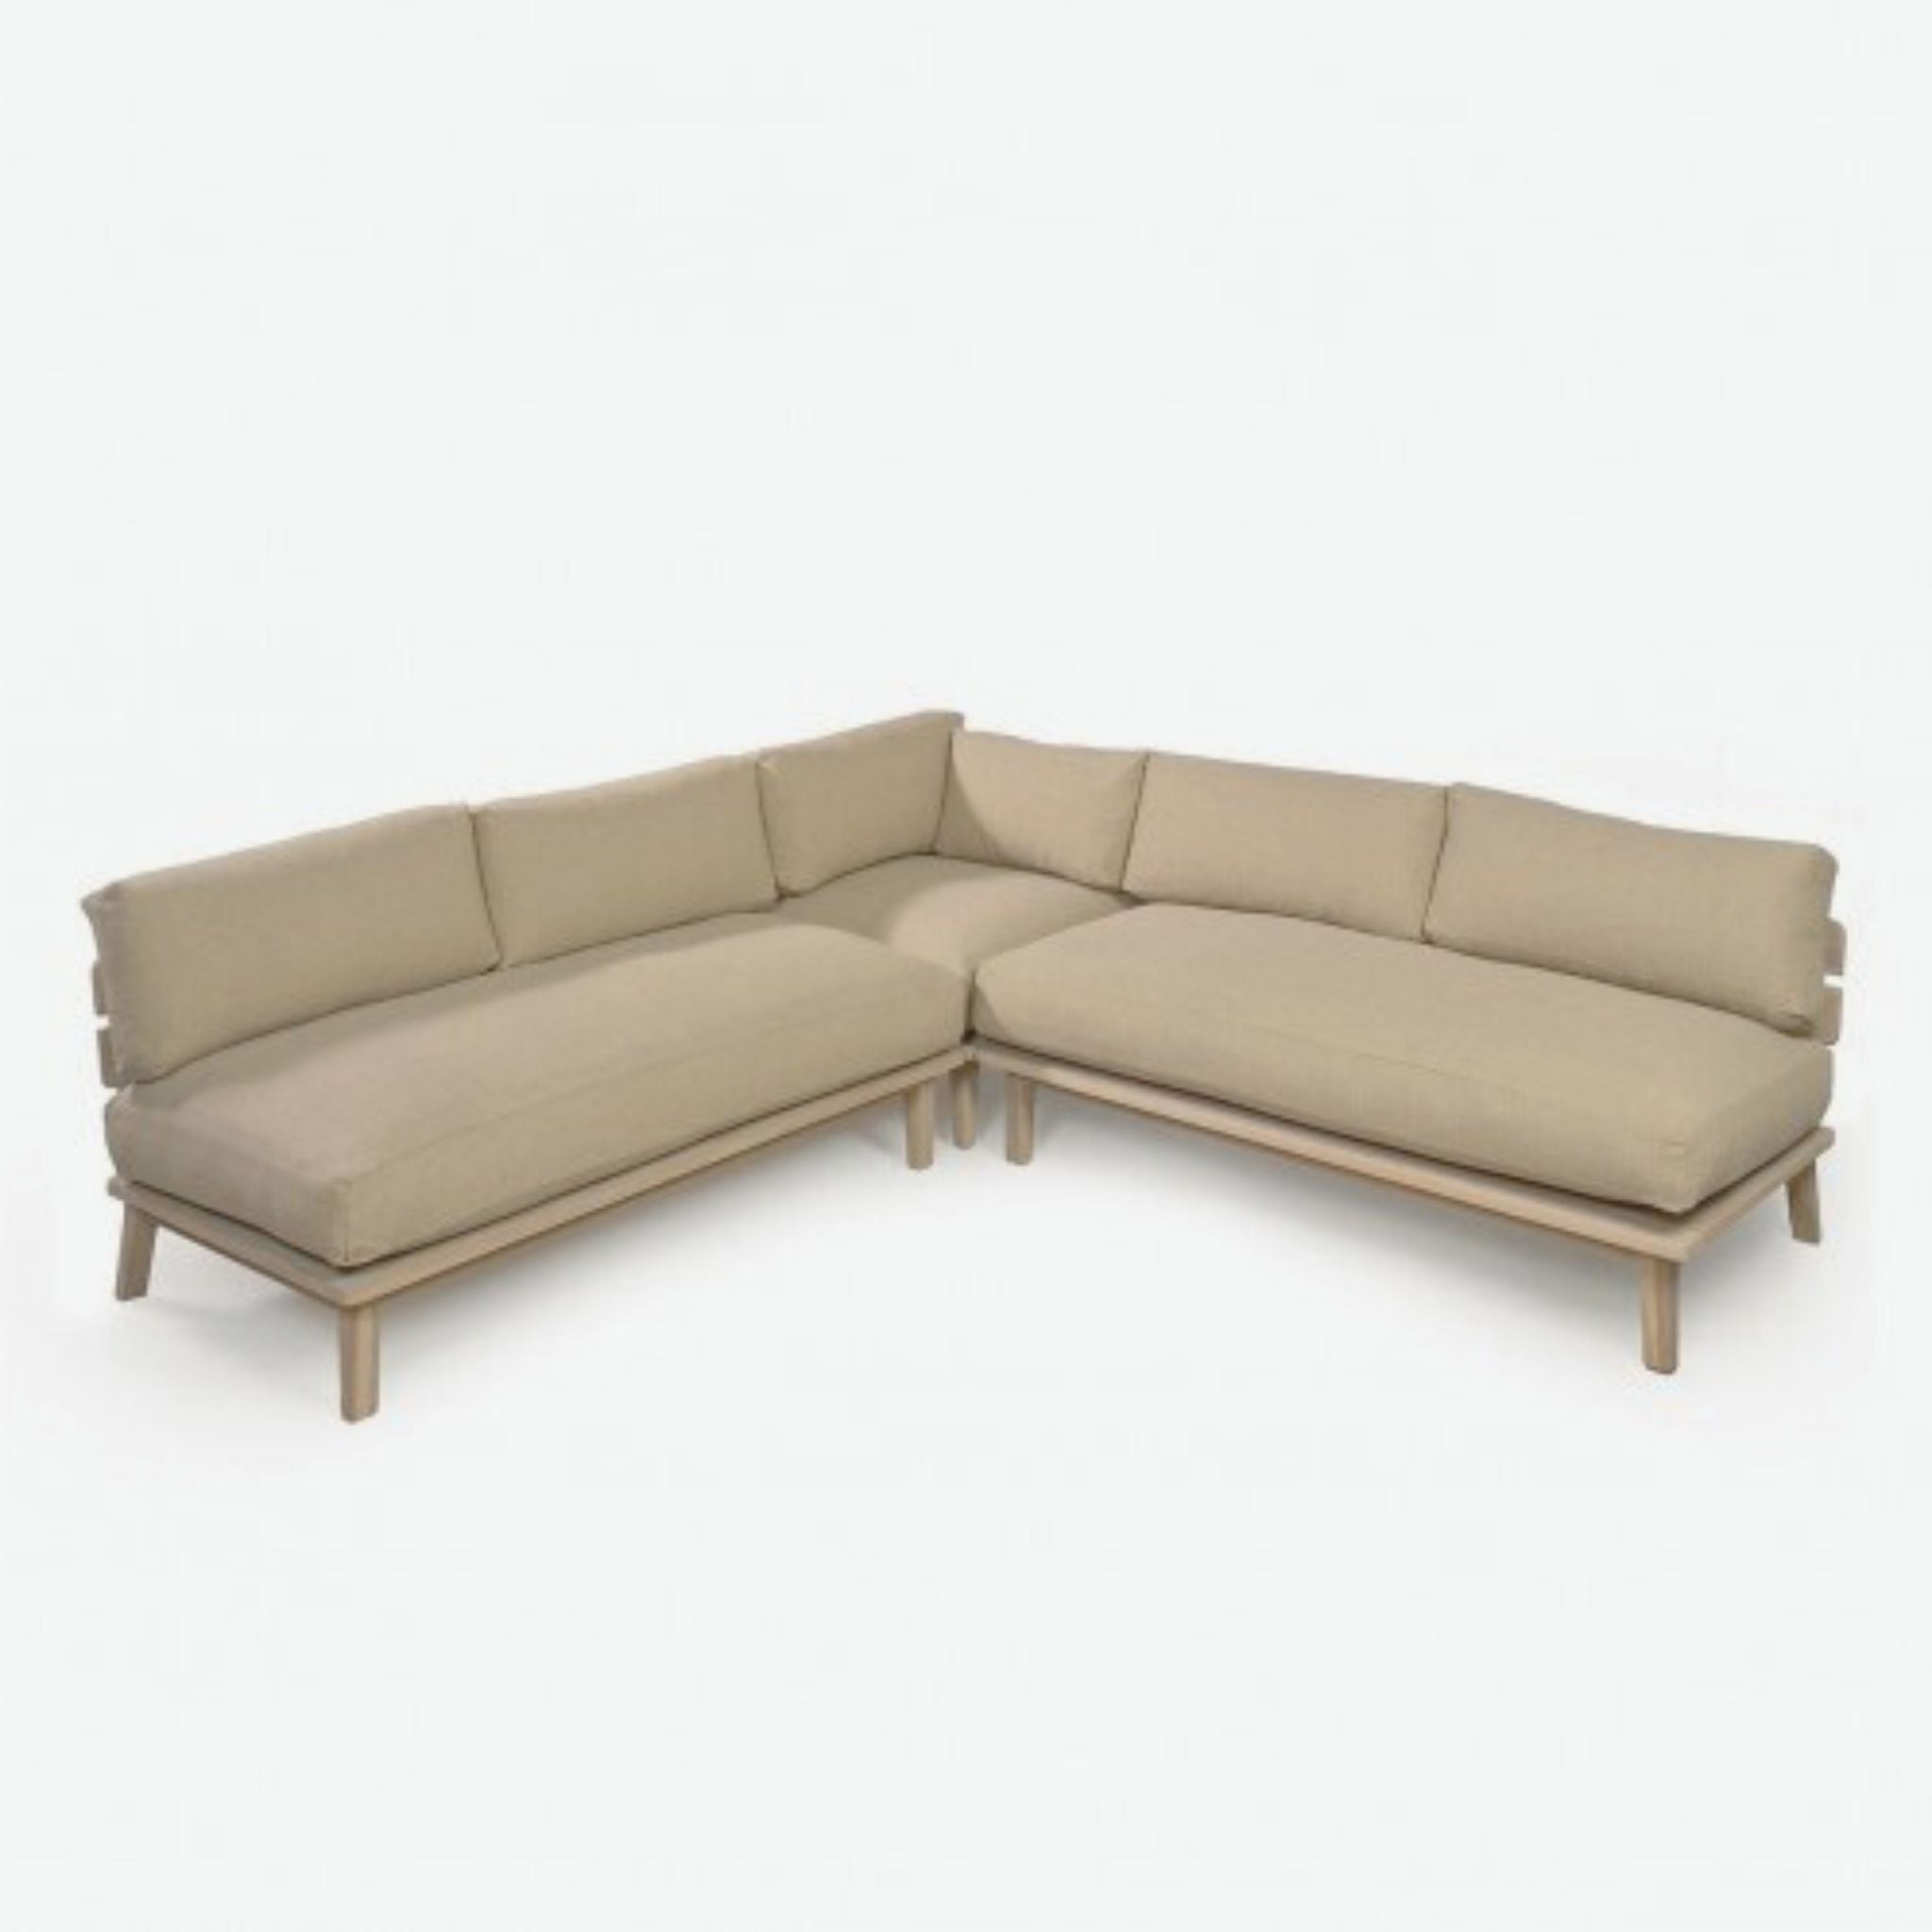 Crisal Decoracion Dium Modular Sofa for Outdoor Bleached Teak and Ivory Upholstery - ModernistaLiving